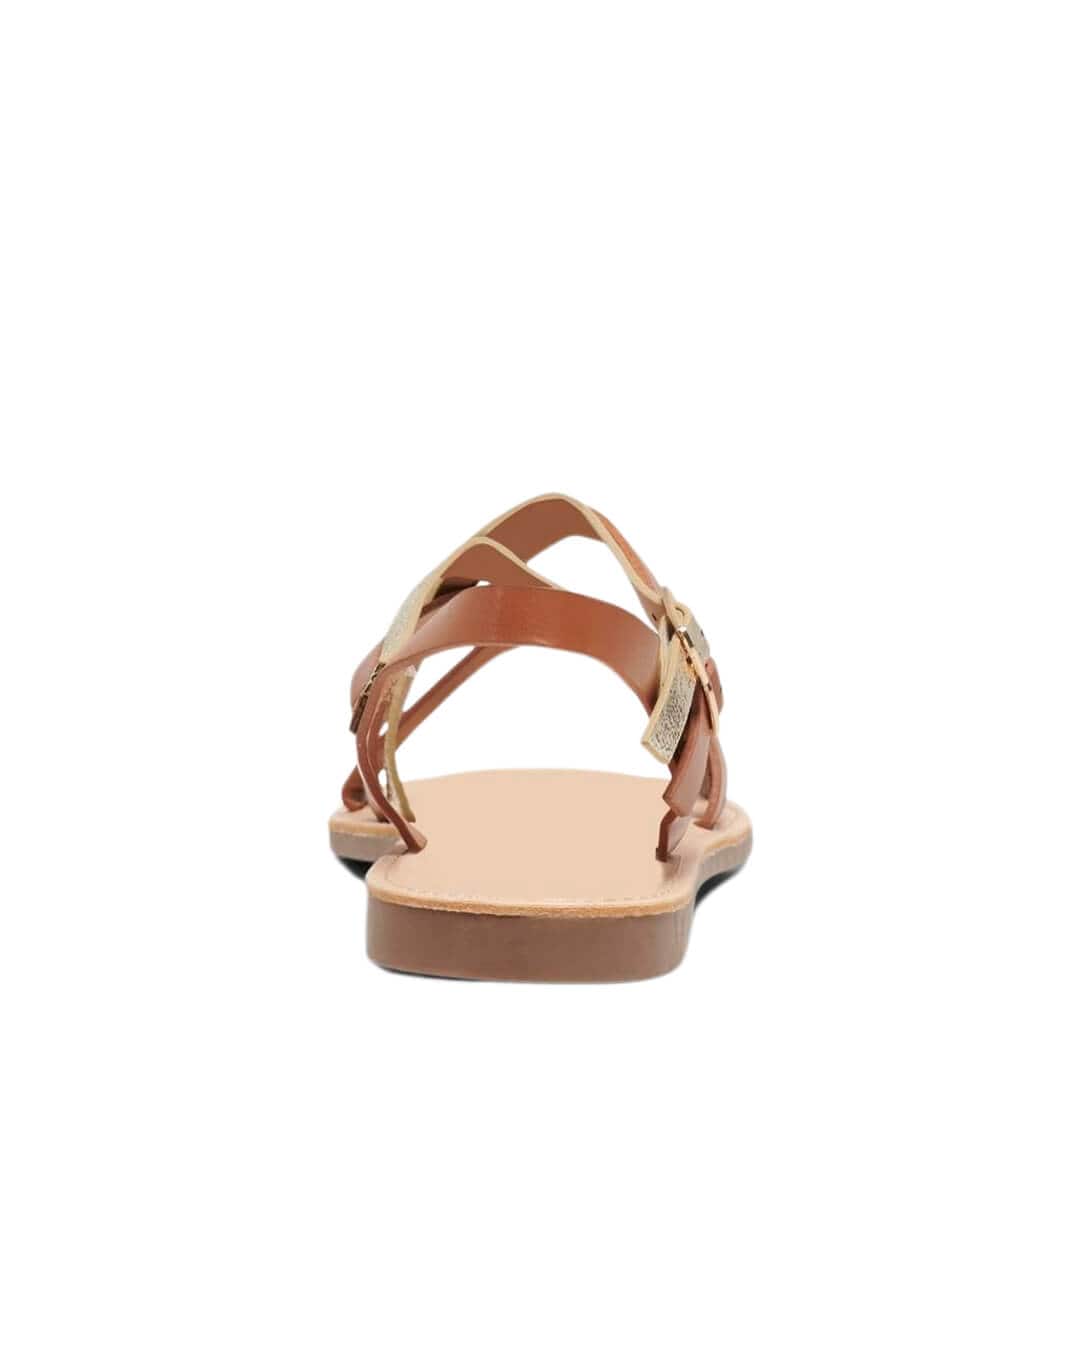 Only Shoes Only Brown Mandala Strap Sandals